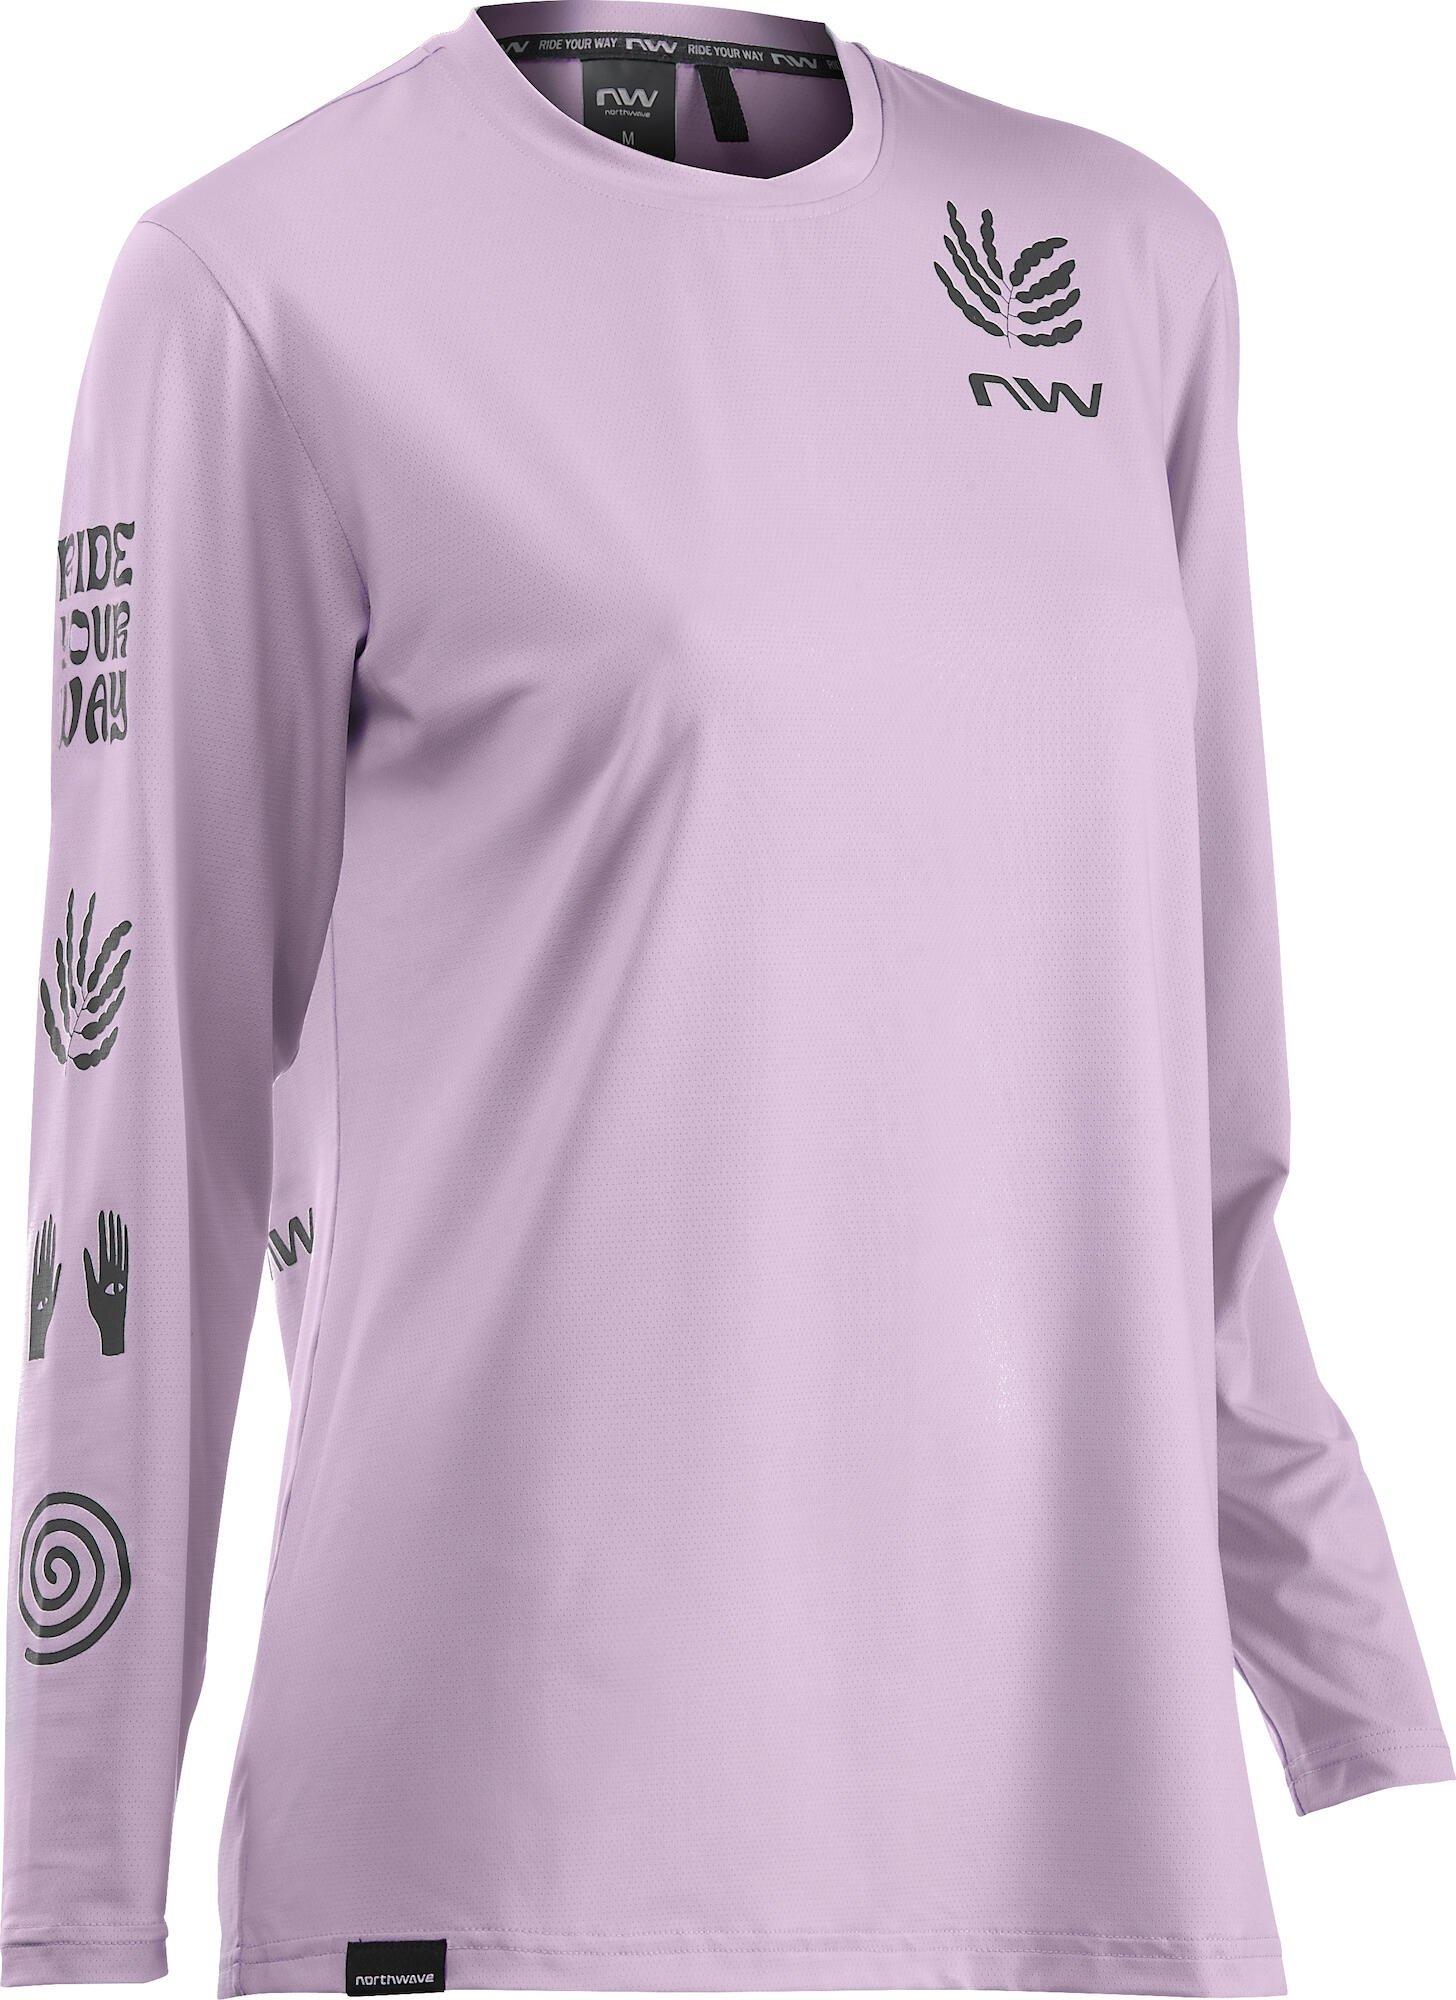 Northwave Xtrail Woman Long Sleeve Jersey lilac (66) L